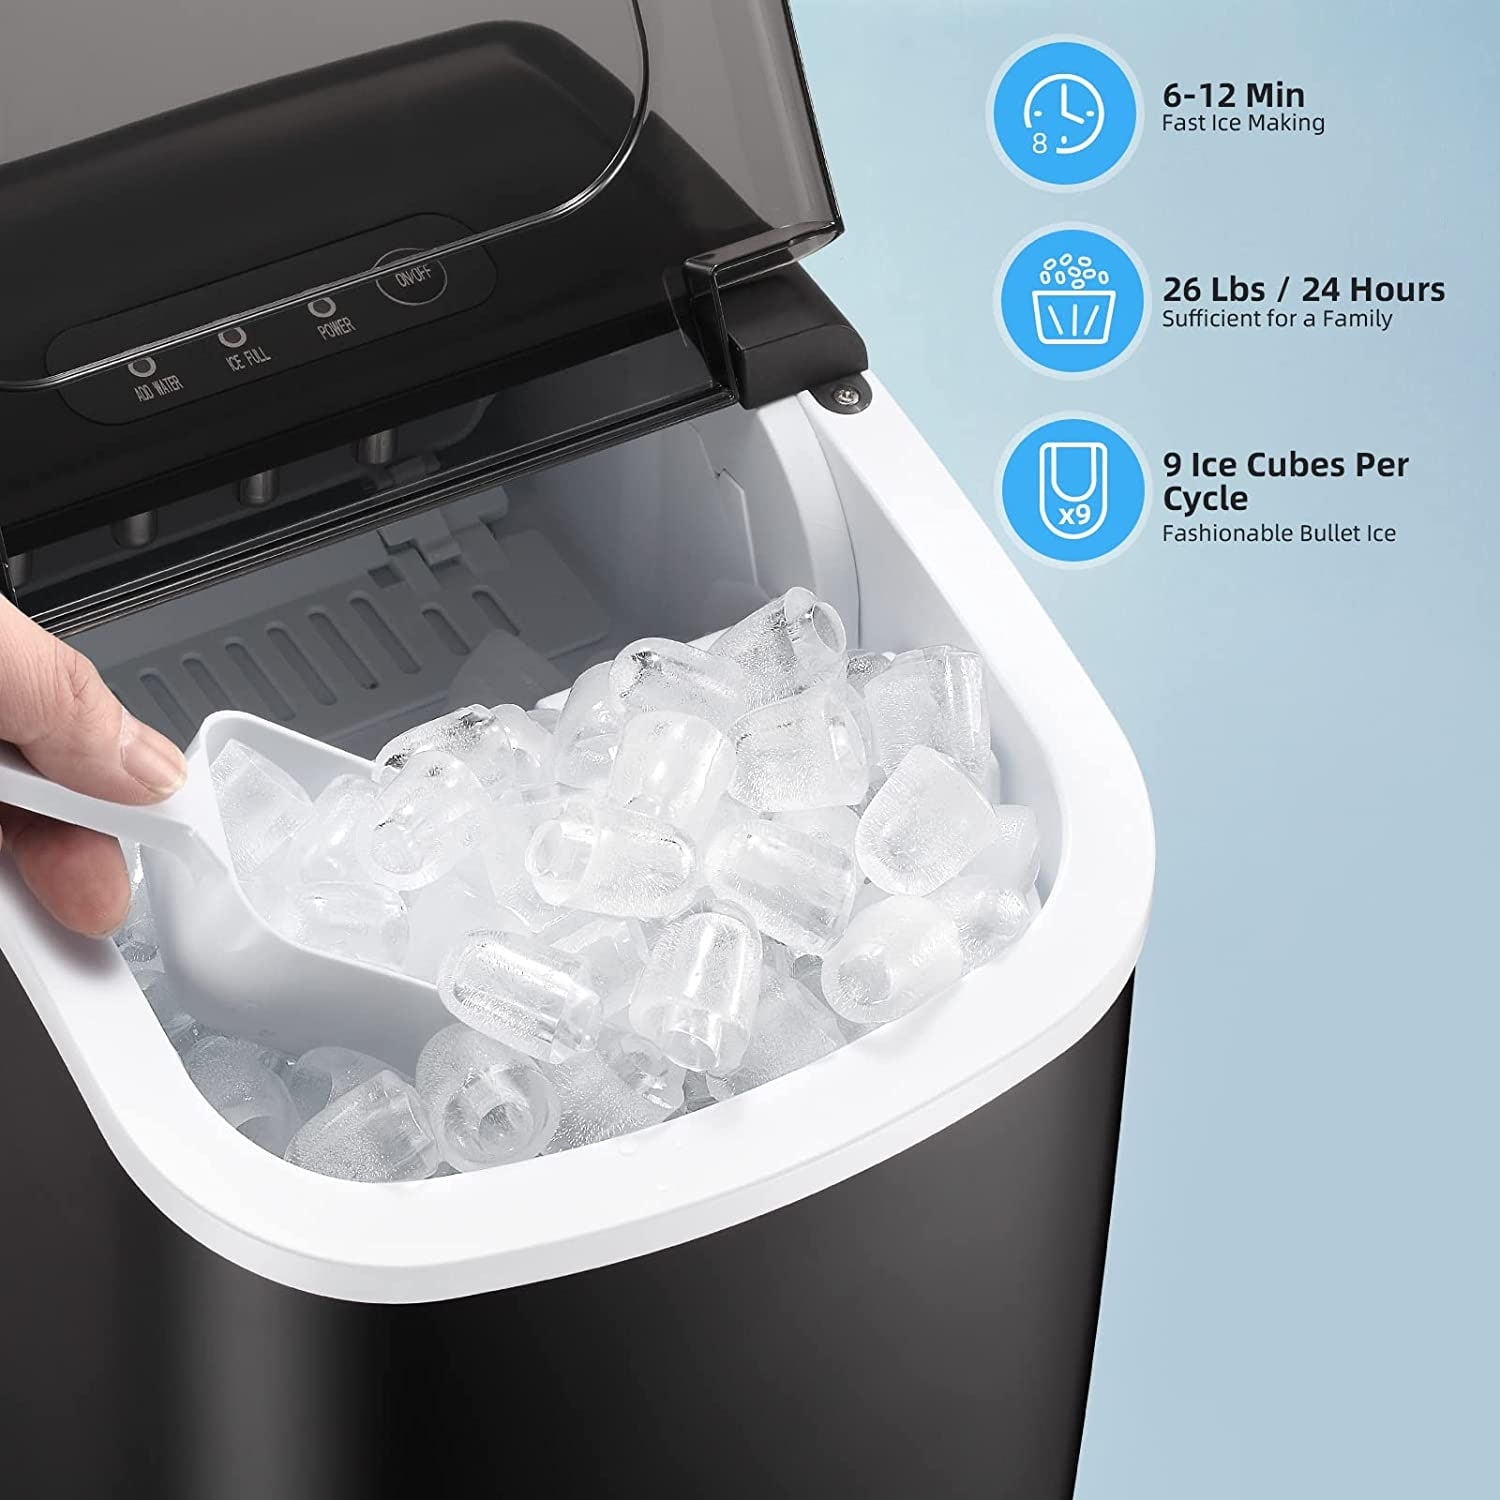 Whynter Compact Ice Maker, 27 LBs, Silver and 2 Year Extended Warranty -  Bed Bath & Beyond - 37184395